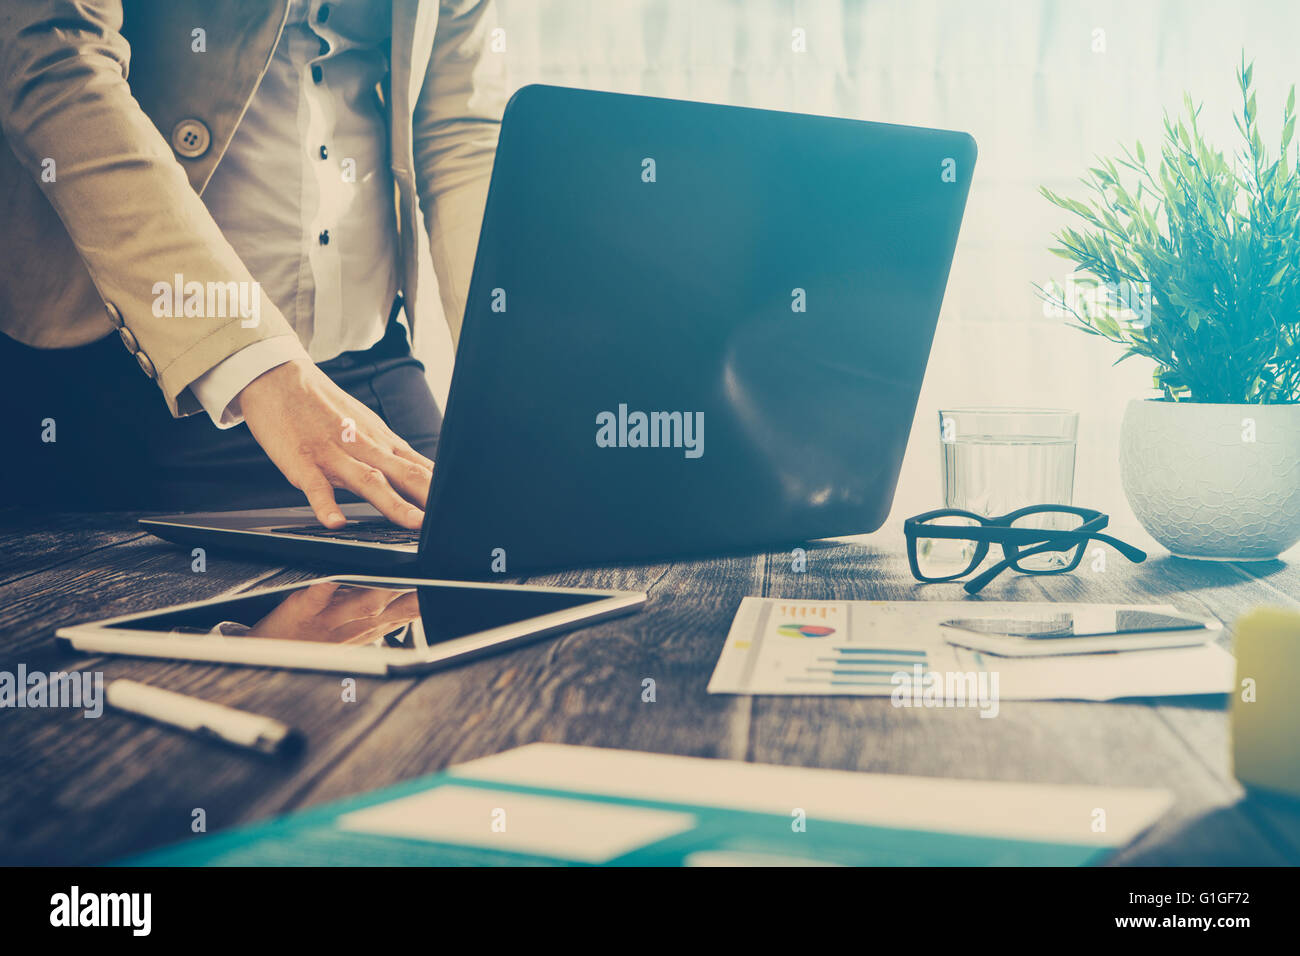 planning business career busy work laptop workplace - stock image Stock Photo